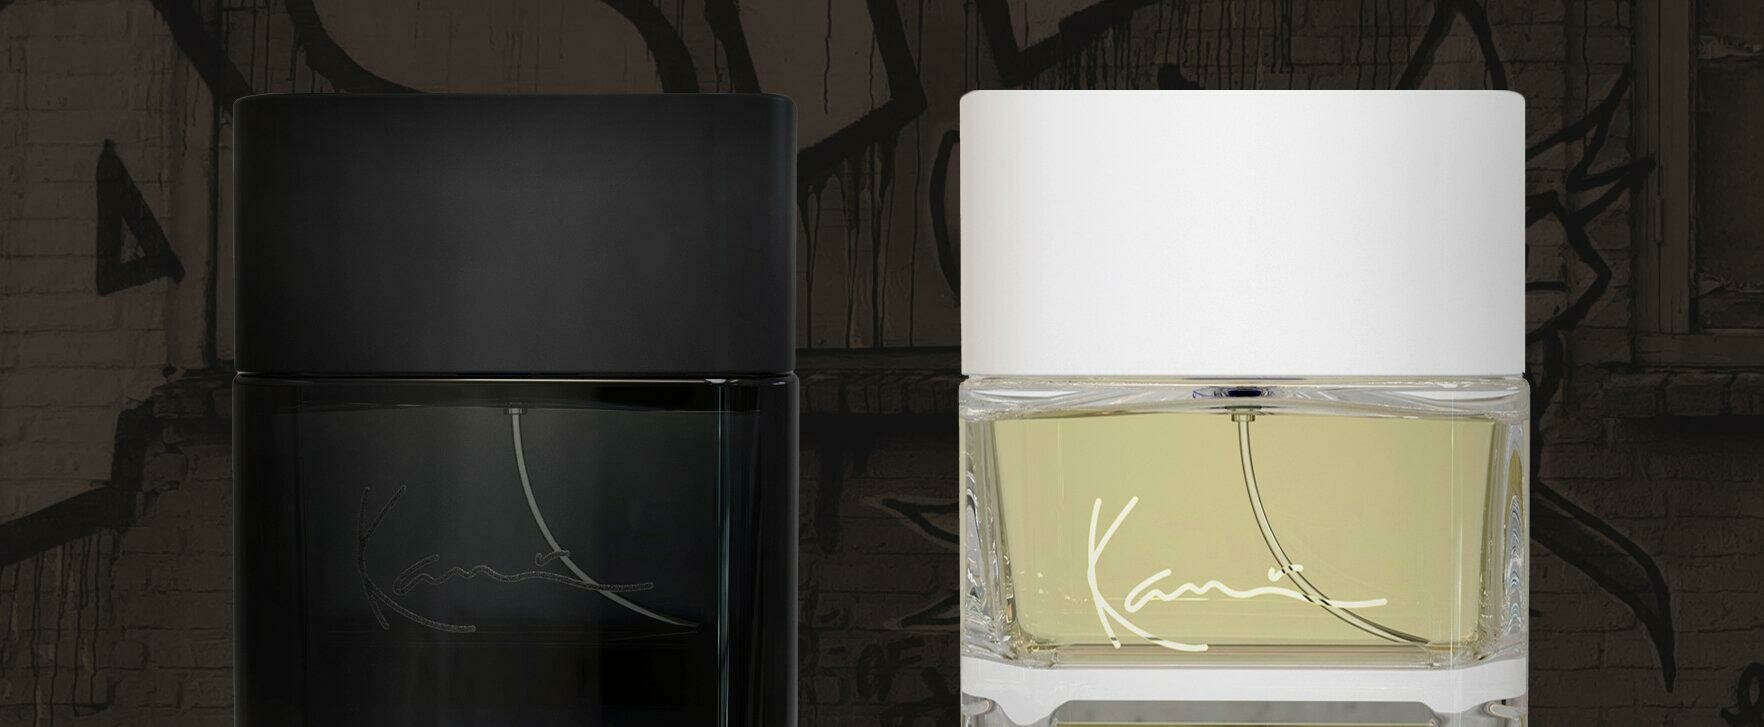 “Kani for Him” and “Kani for Her”: Hip-Hop Cult Brand Launches Sporty Fragrance Duo